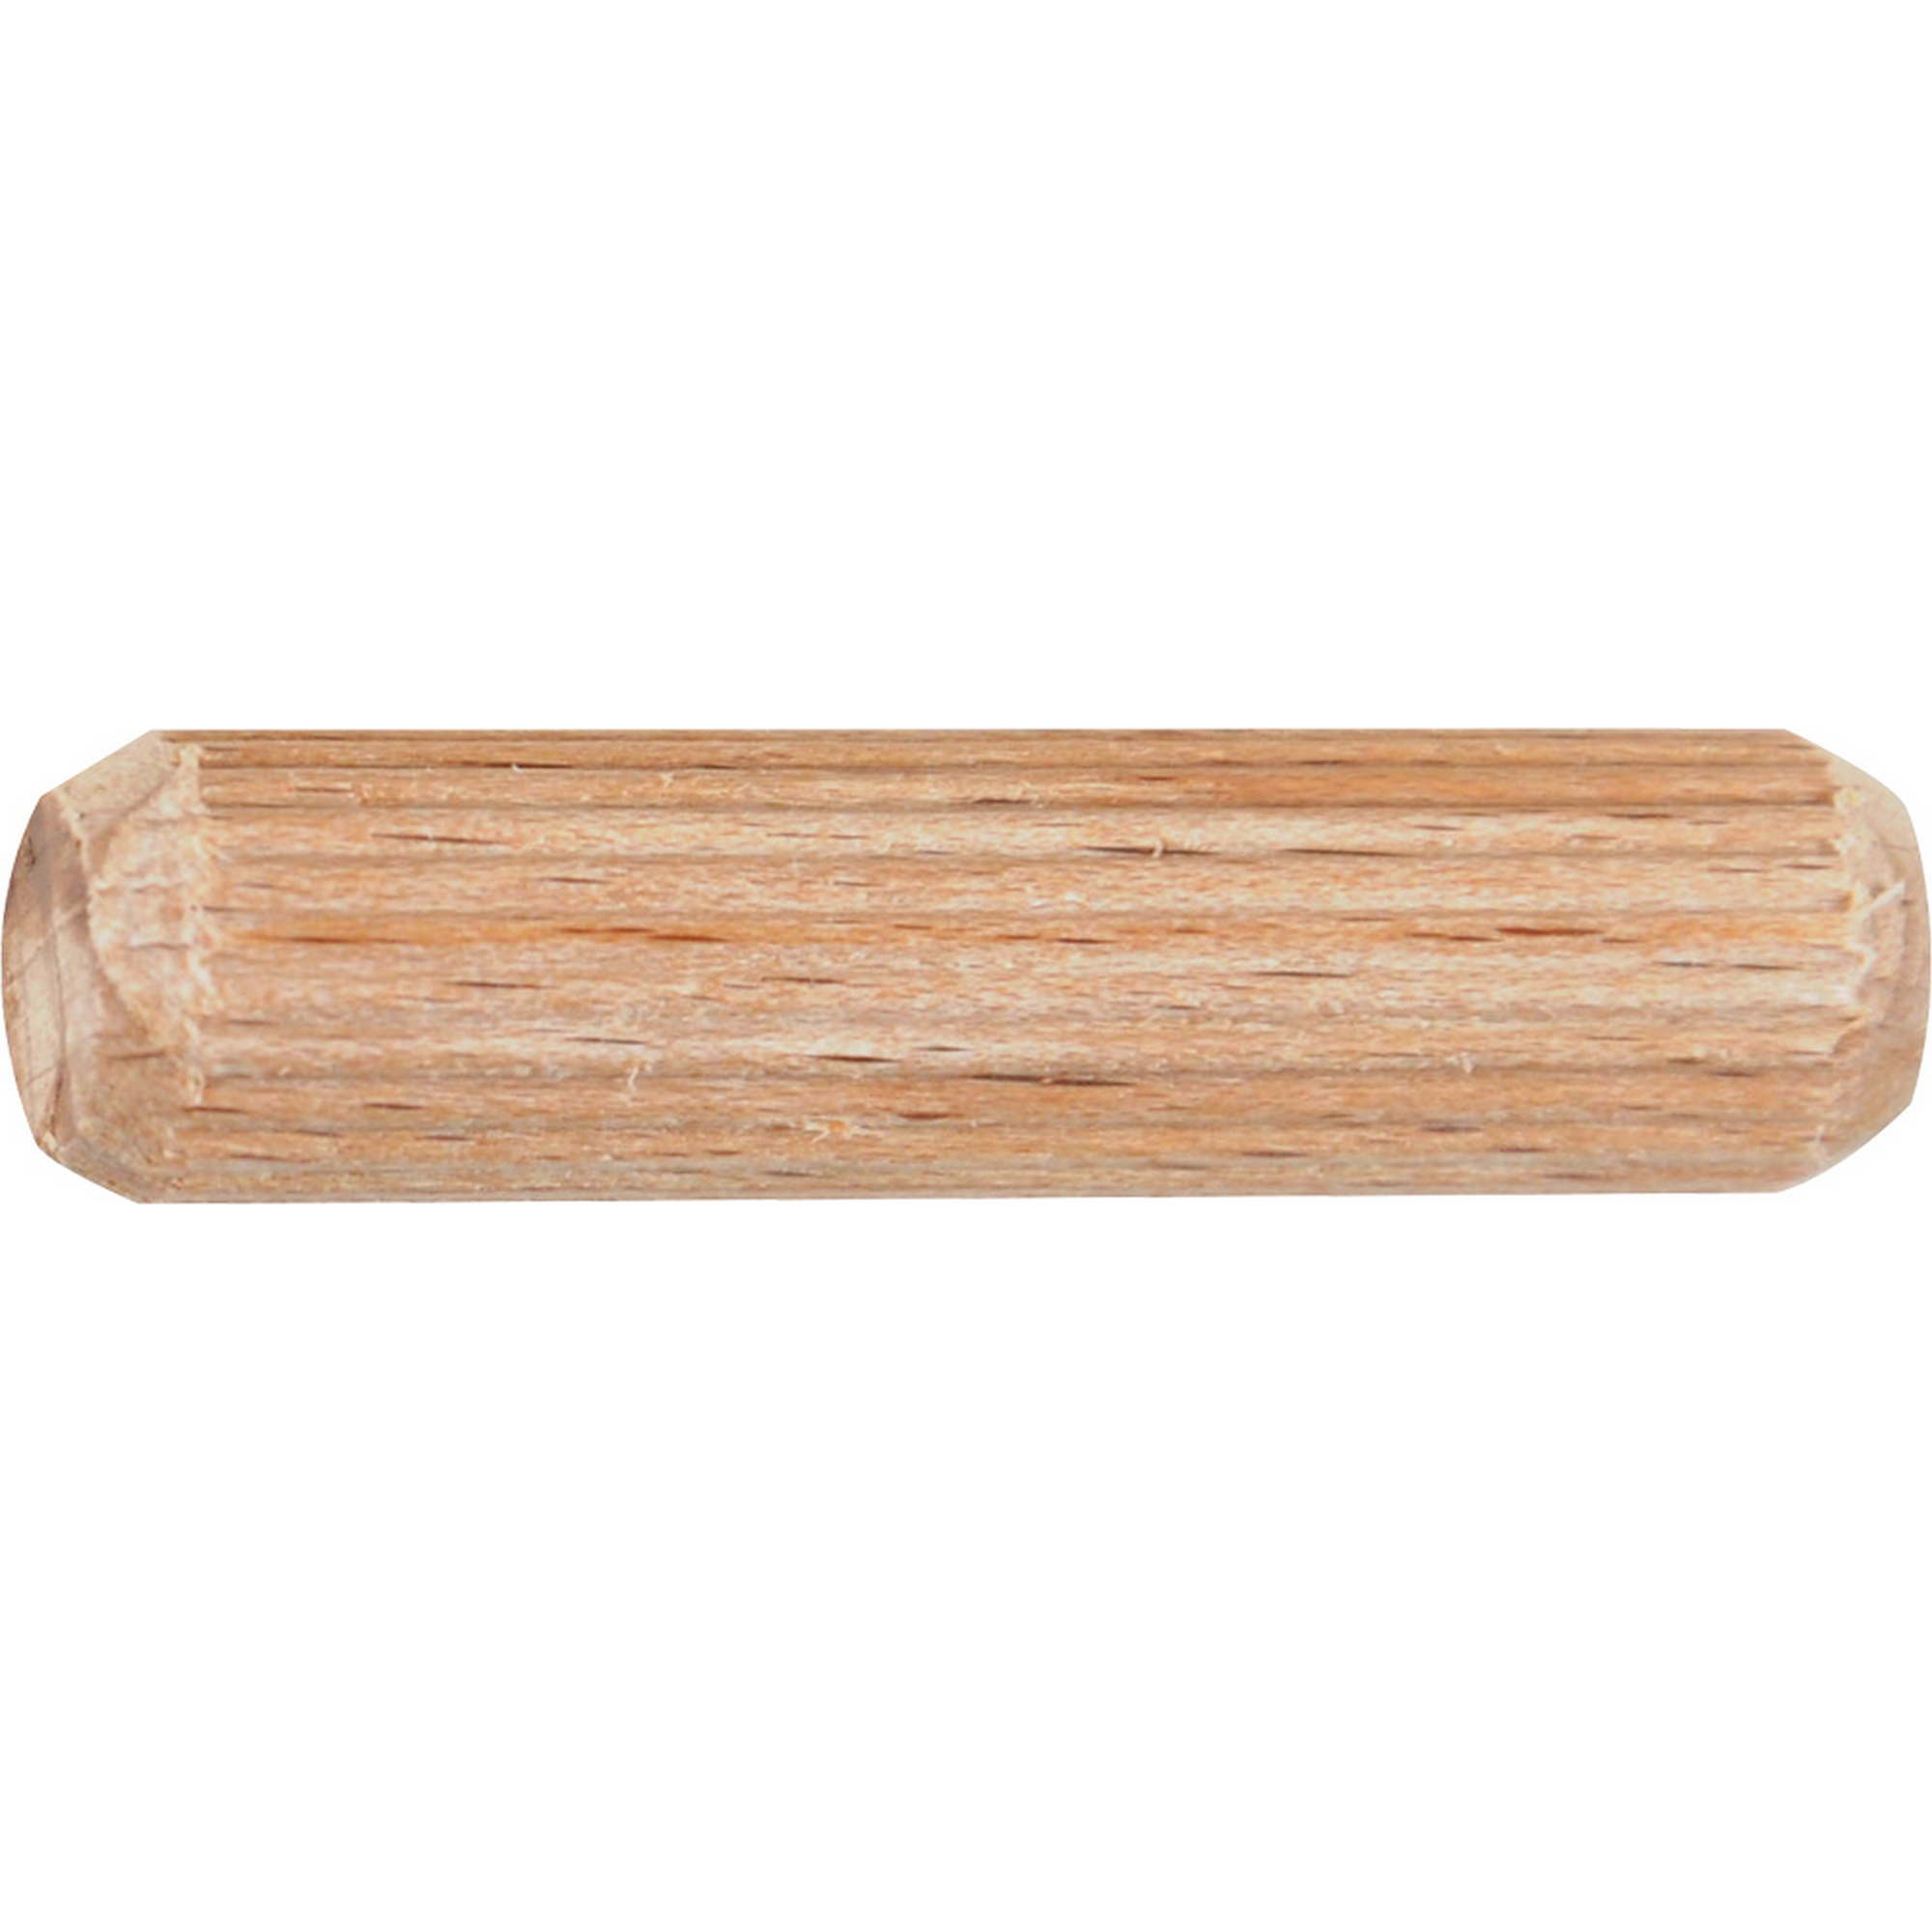 Holzdübel 10 x 40 mm 30 Stück + product picture